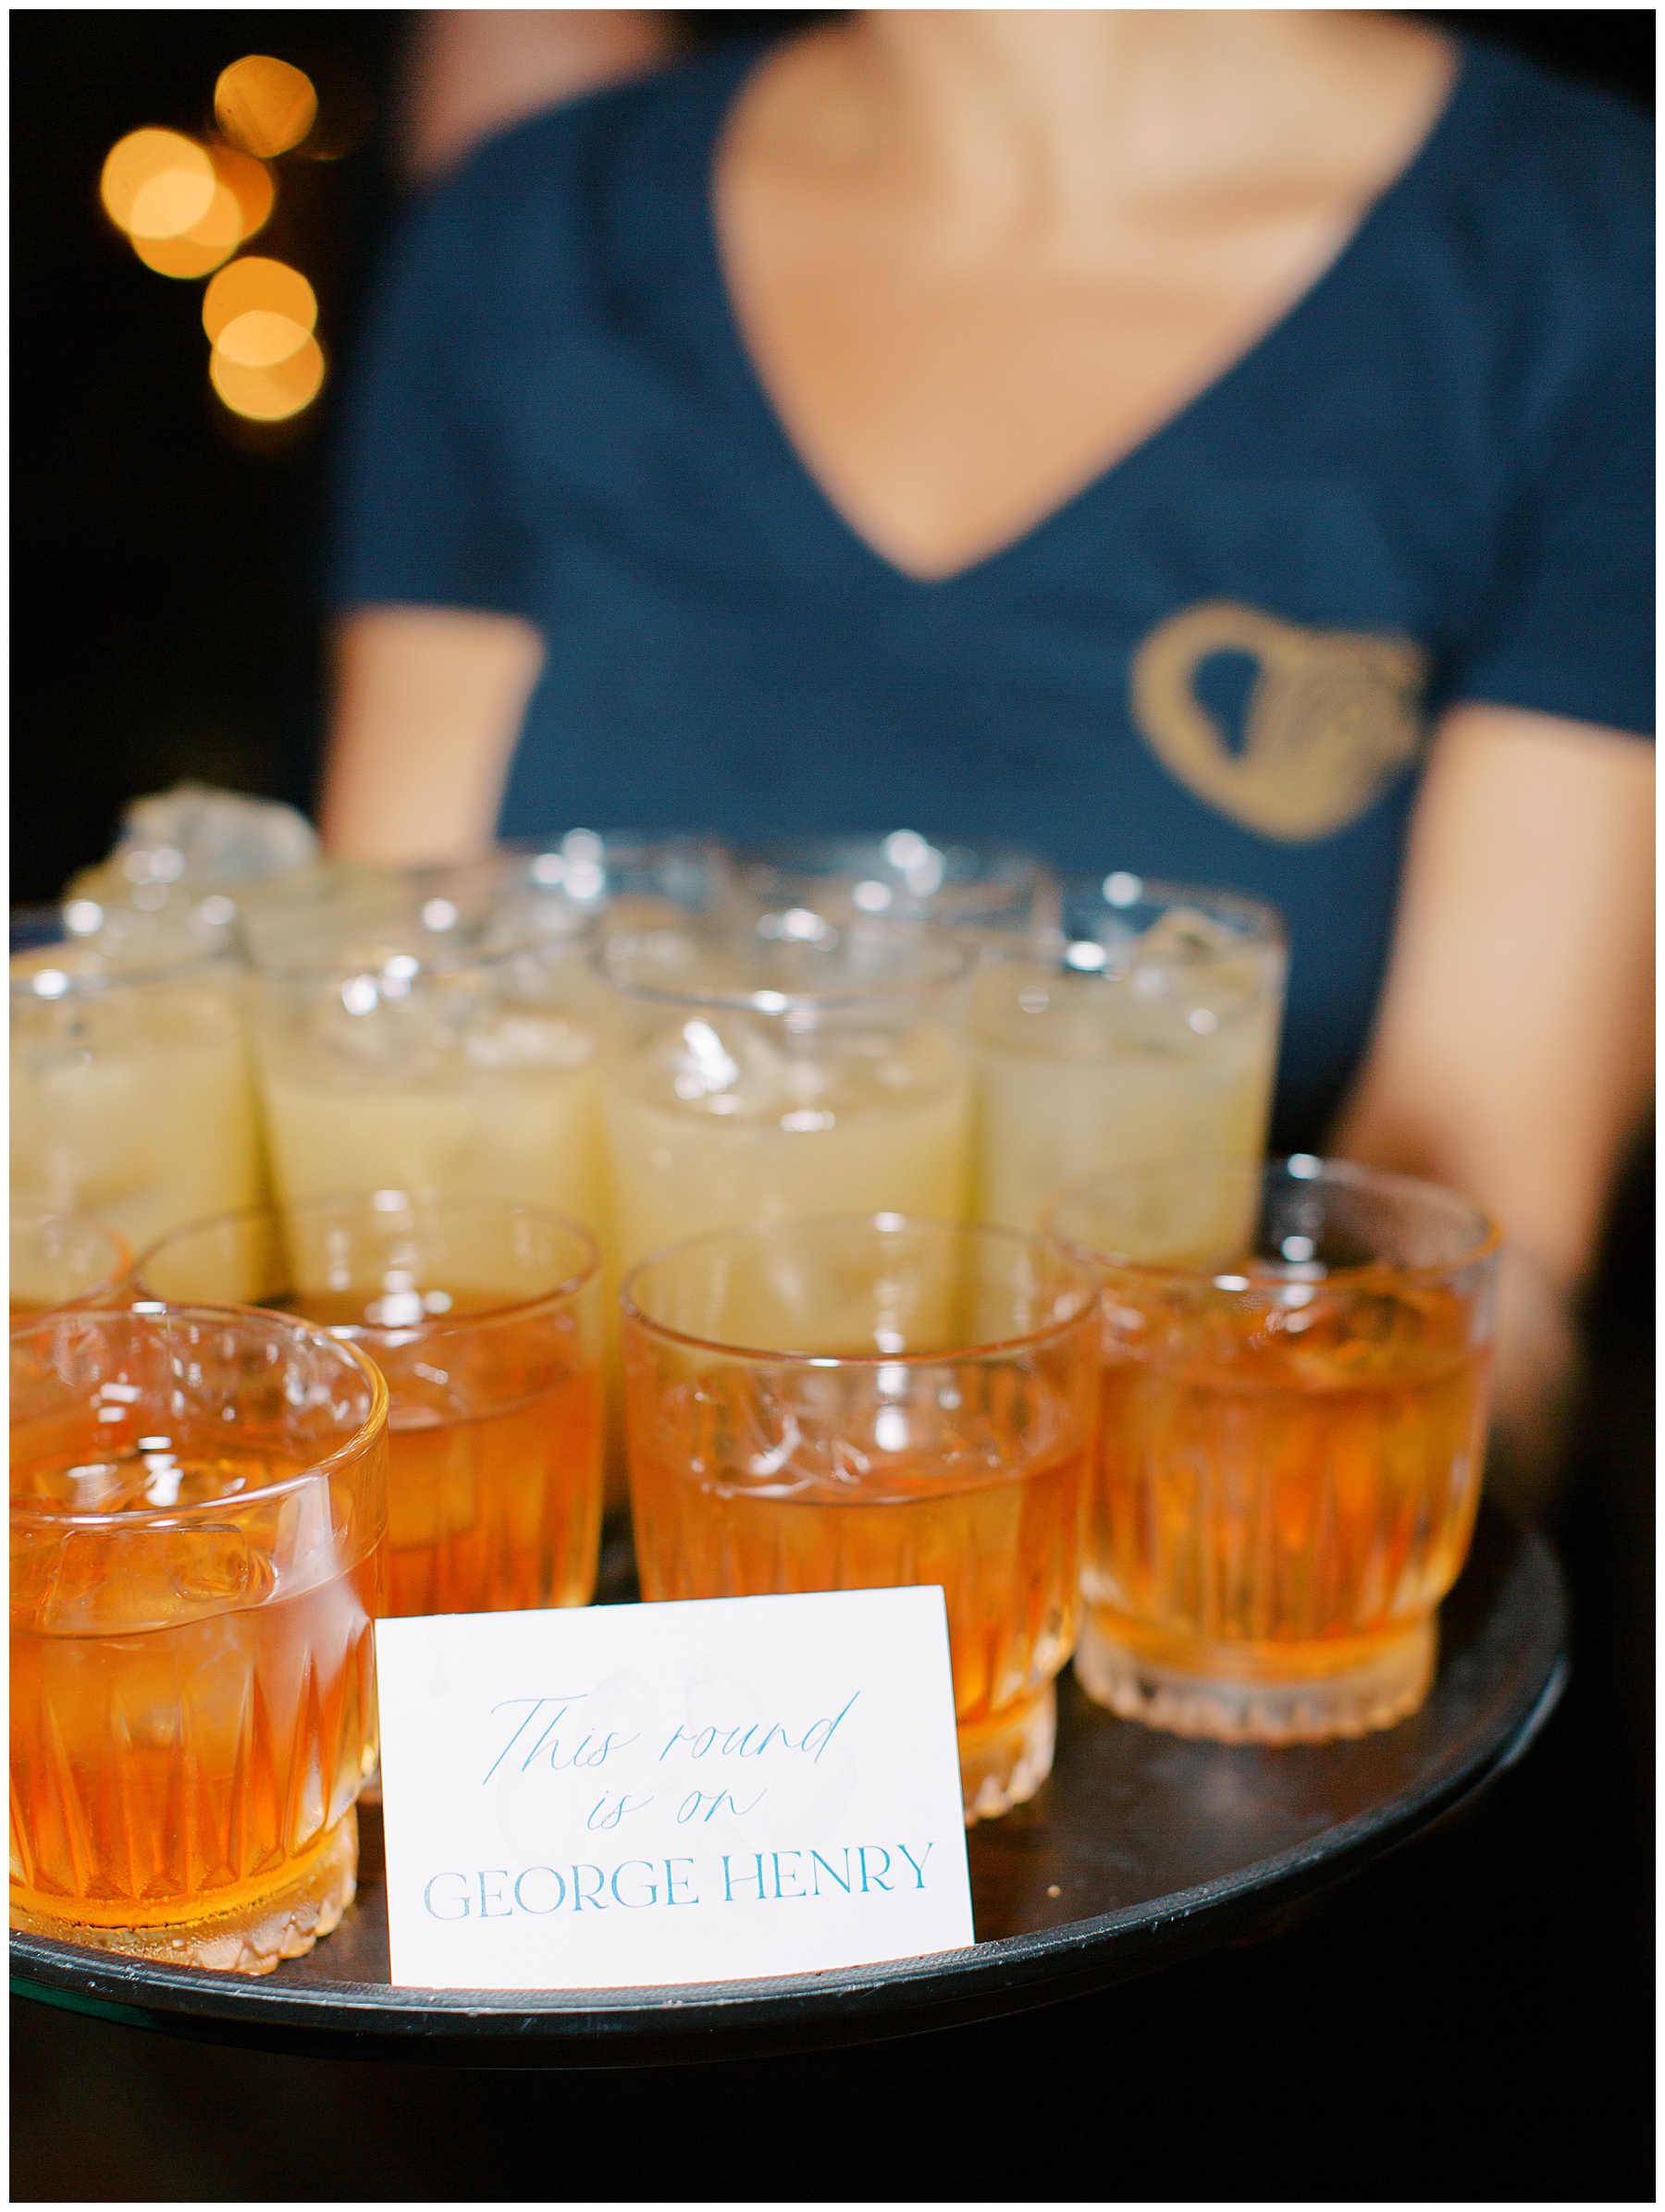 woman holds tray of lemonade and bourbon with card that says "this round is on George Henry" 